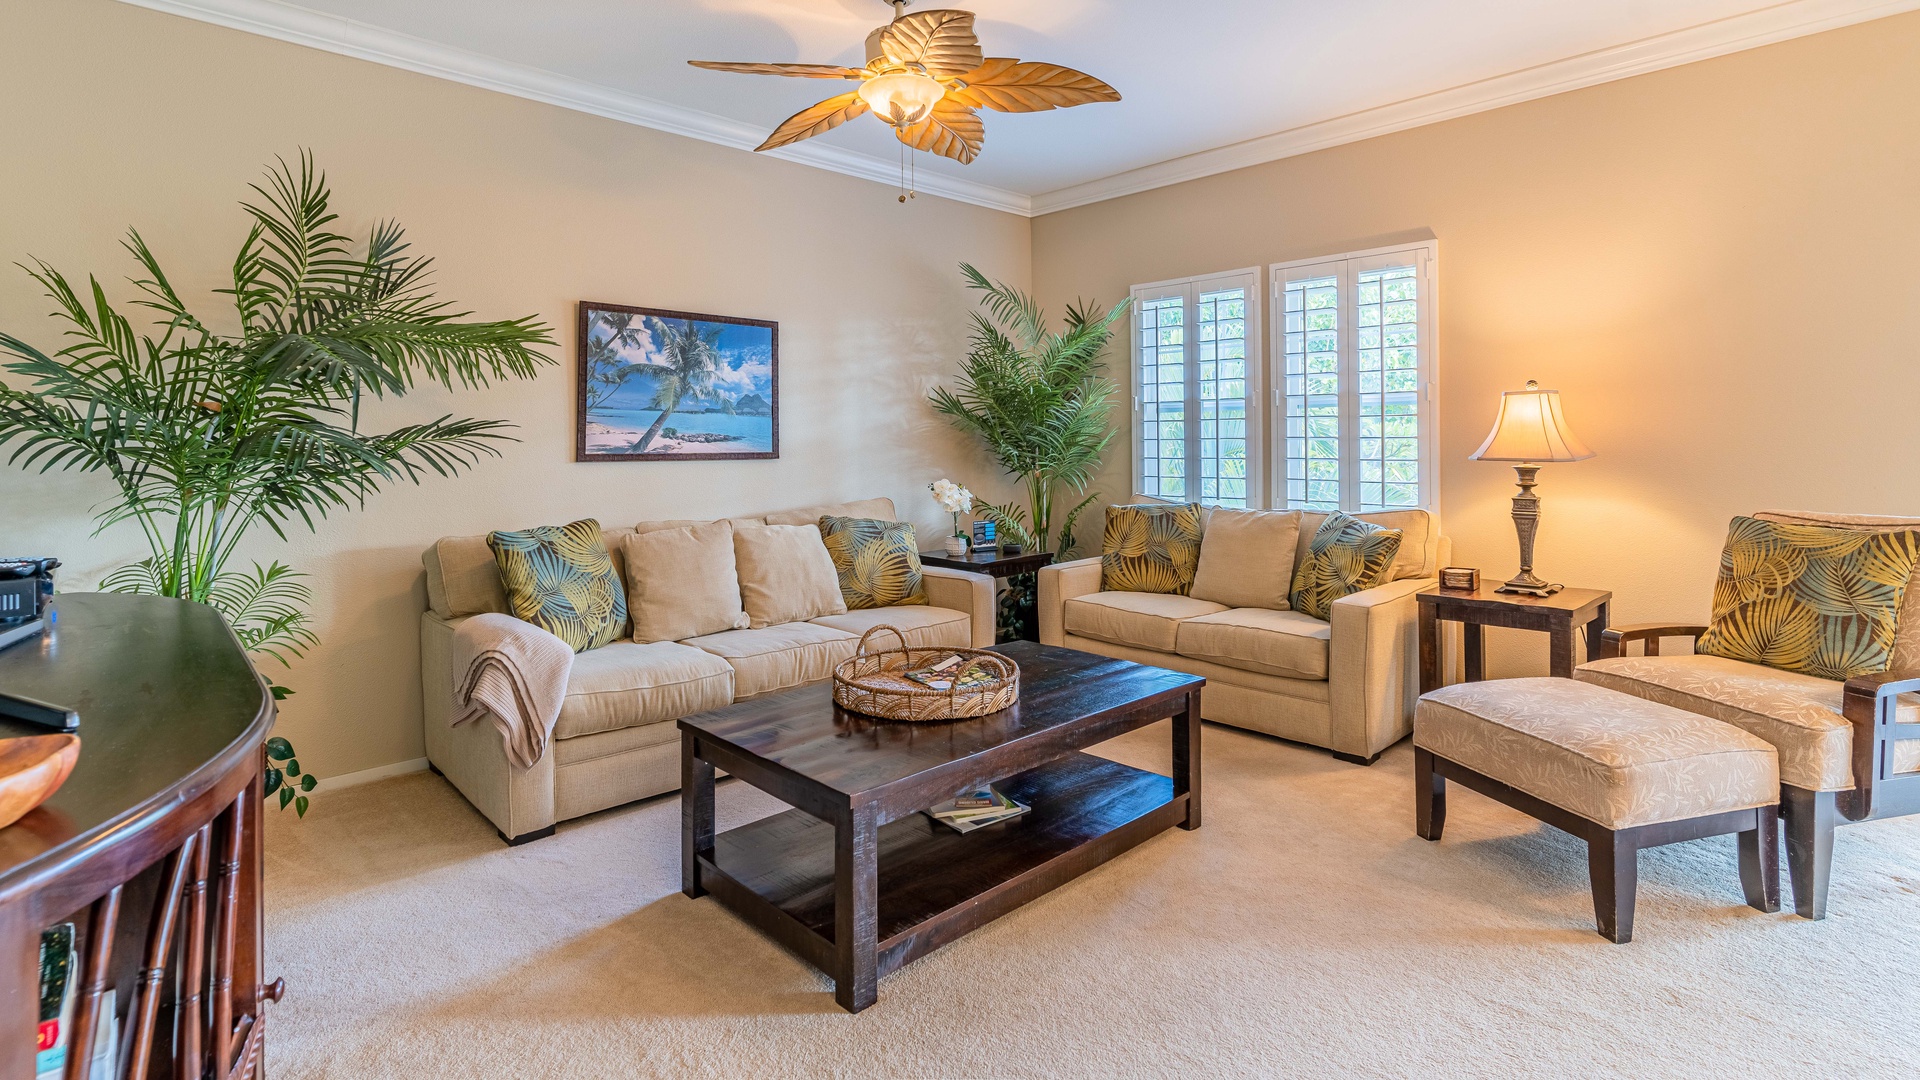 Kapolei Vacation Rentals, Coconut Plantation 1194-3 - The soft touches of the tropics throughout the home under boutique lighting.